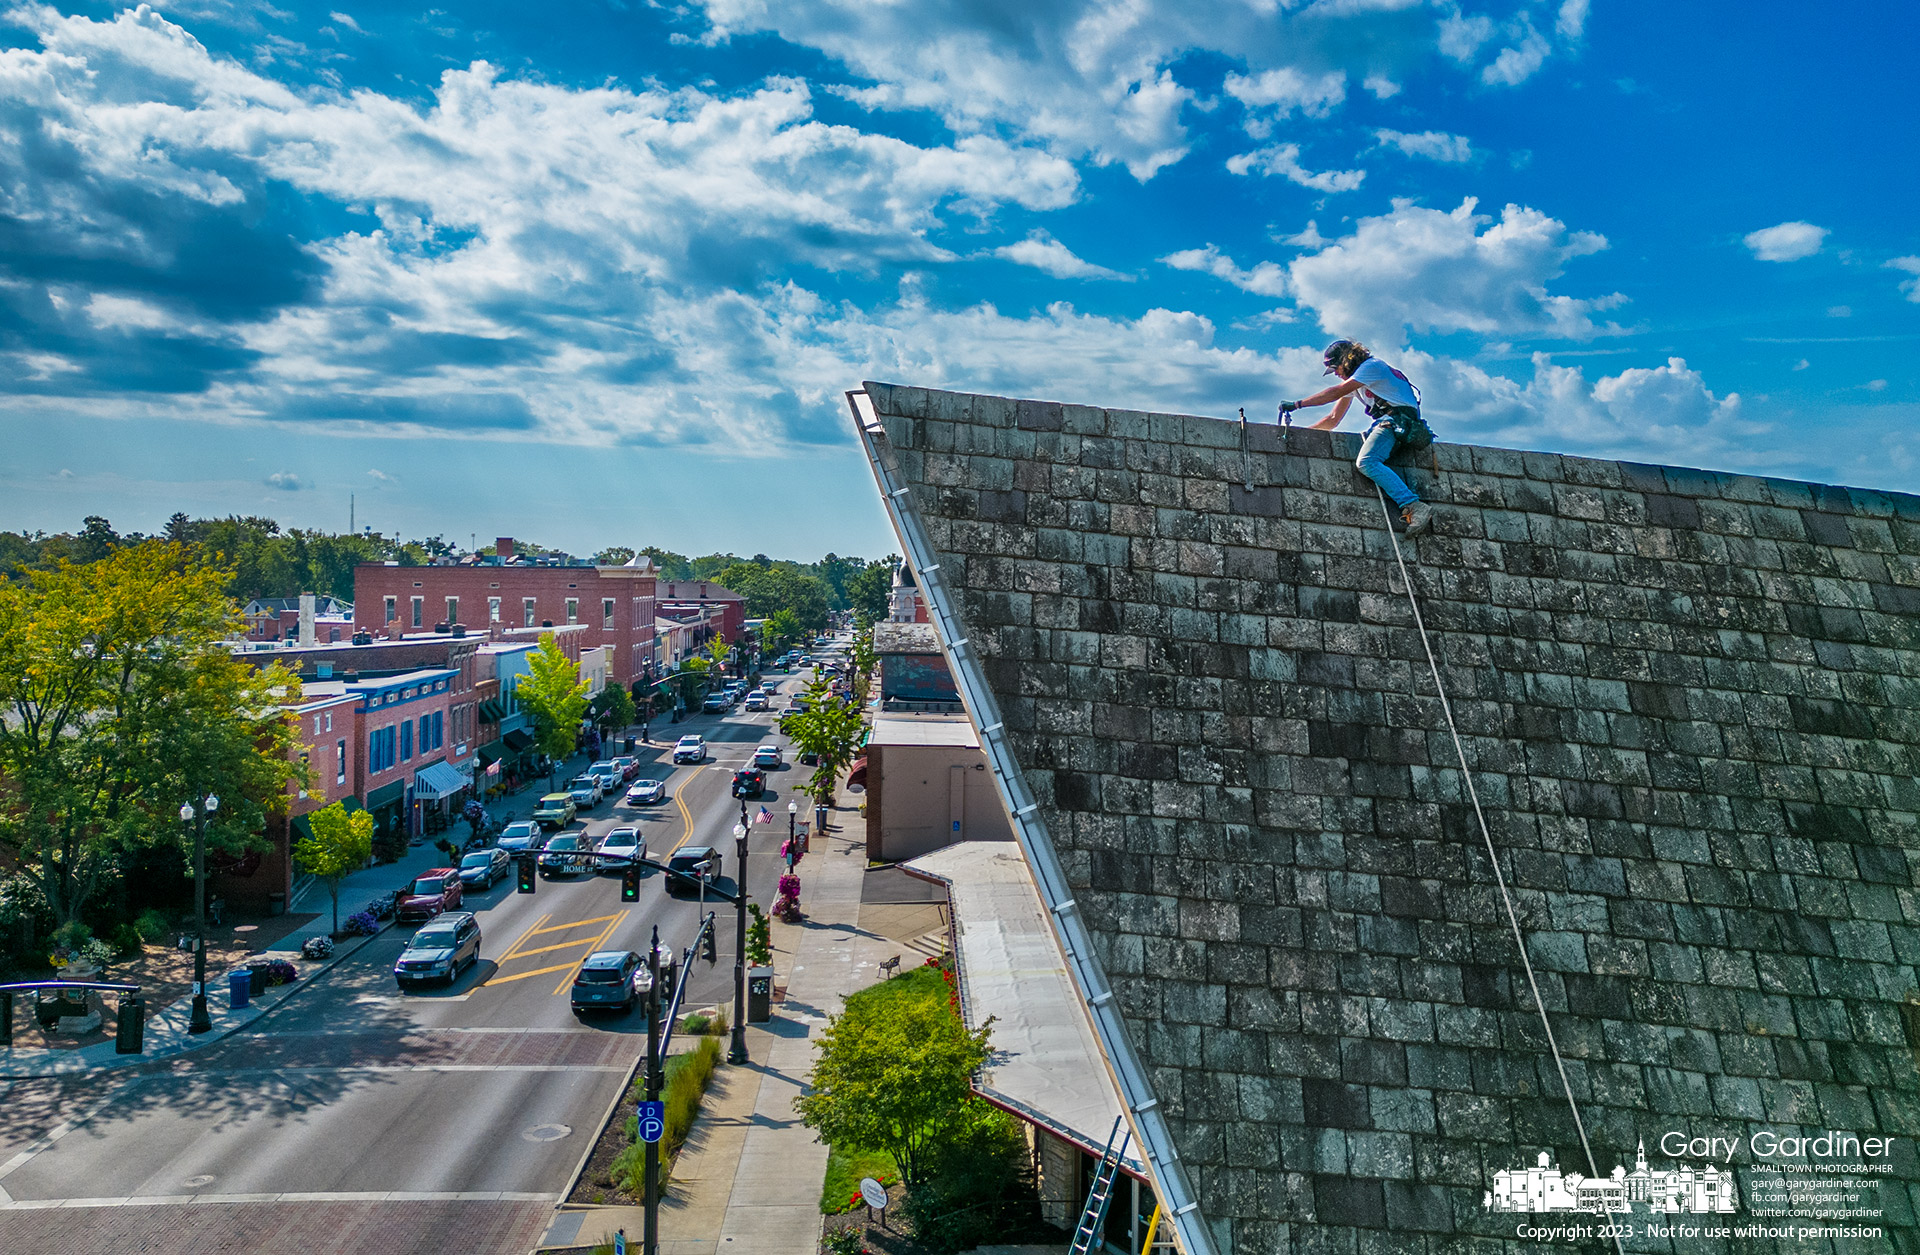 A roofer straddles the peak of the slate roof of Church of the Messiah in Uptown Westerville where he was replacing broken tiles as part of repairs to the church's roof. My Final Photo for September 6, 2023.